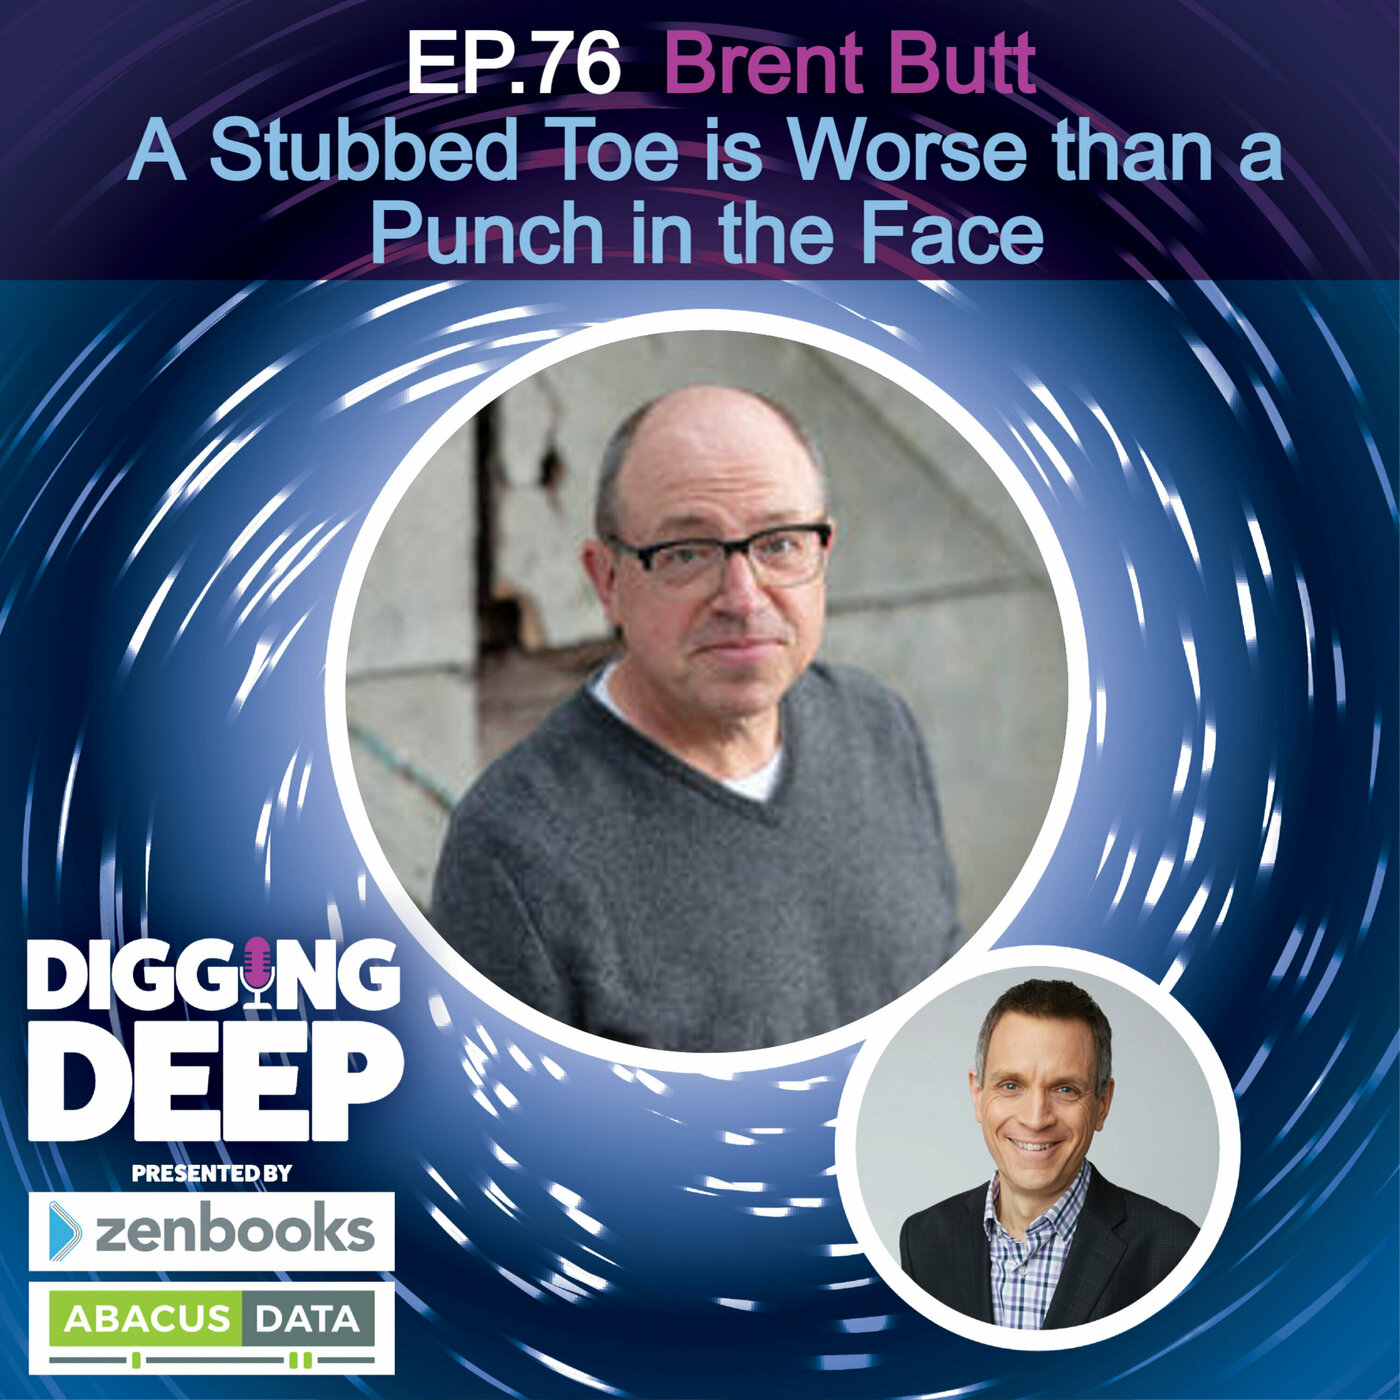 Brent Butt: A Stubbed Toe is Worse than a Punch in the Face